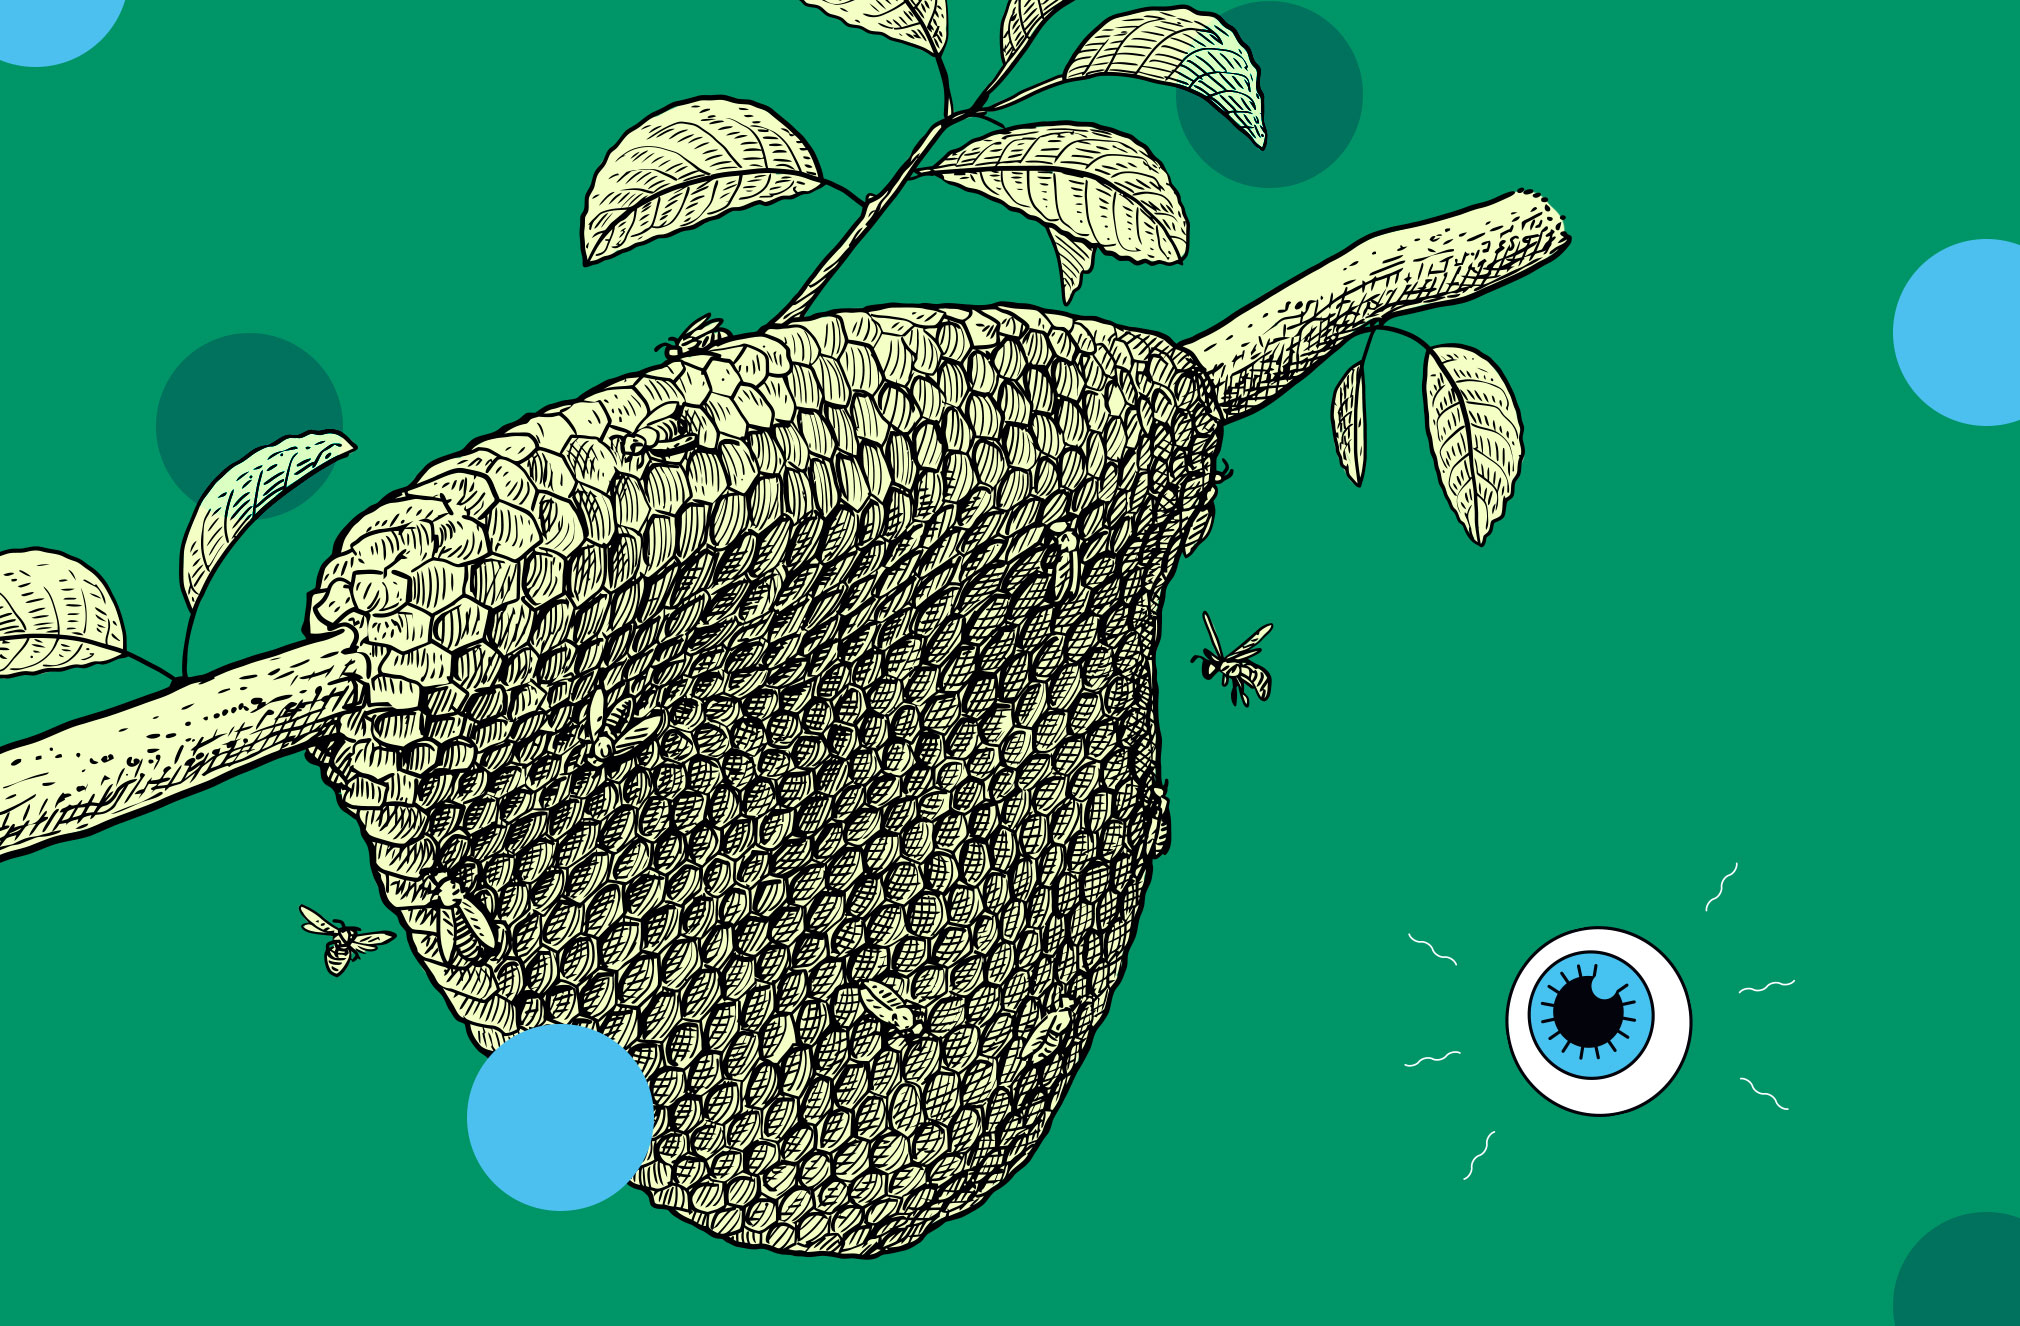 an illustration of a bee hive on a tree branch against a green background with a small drawing of an eyeball logo